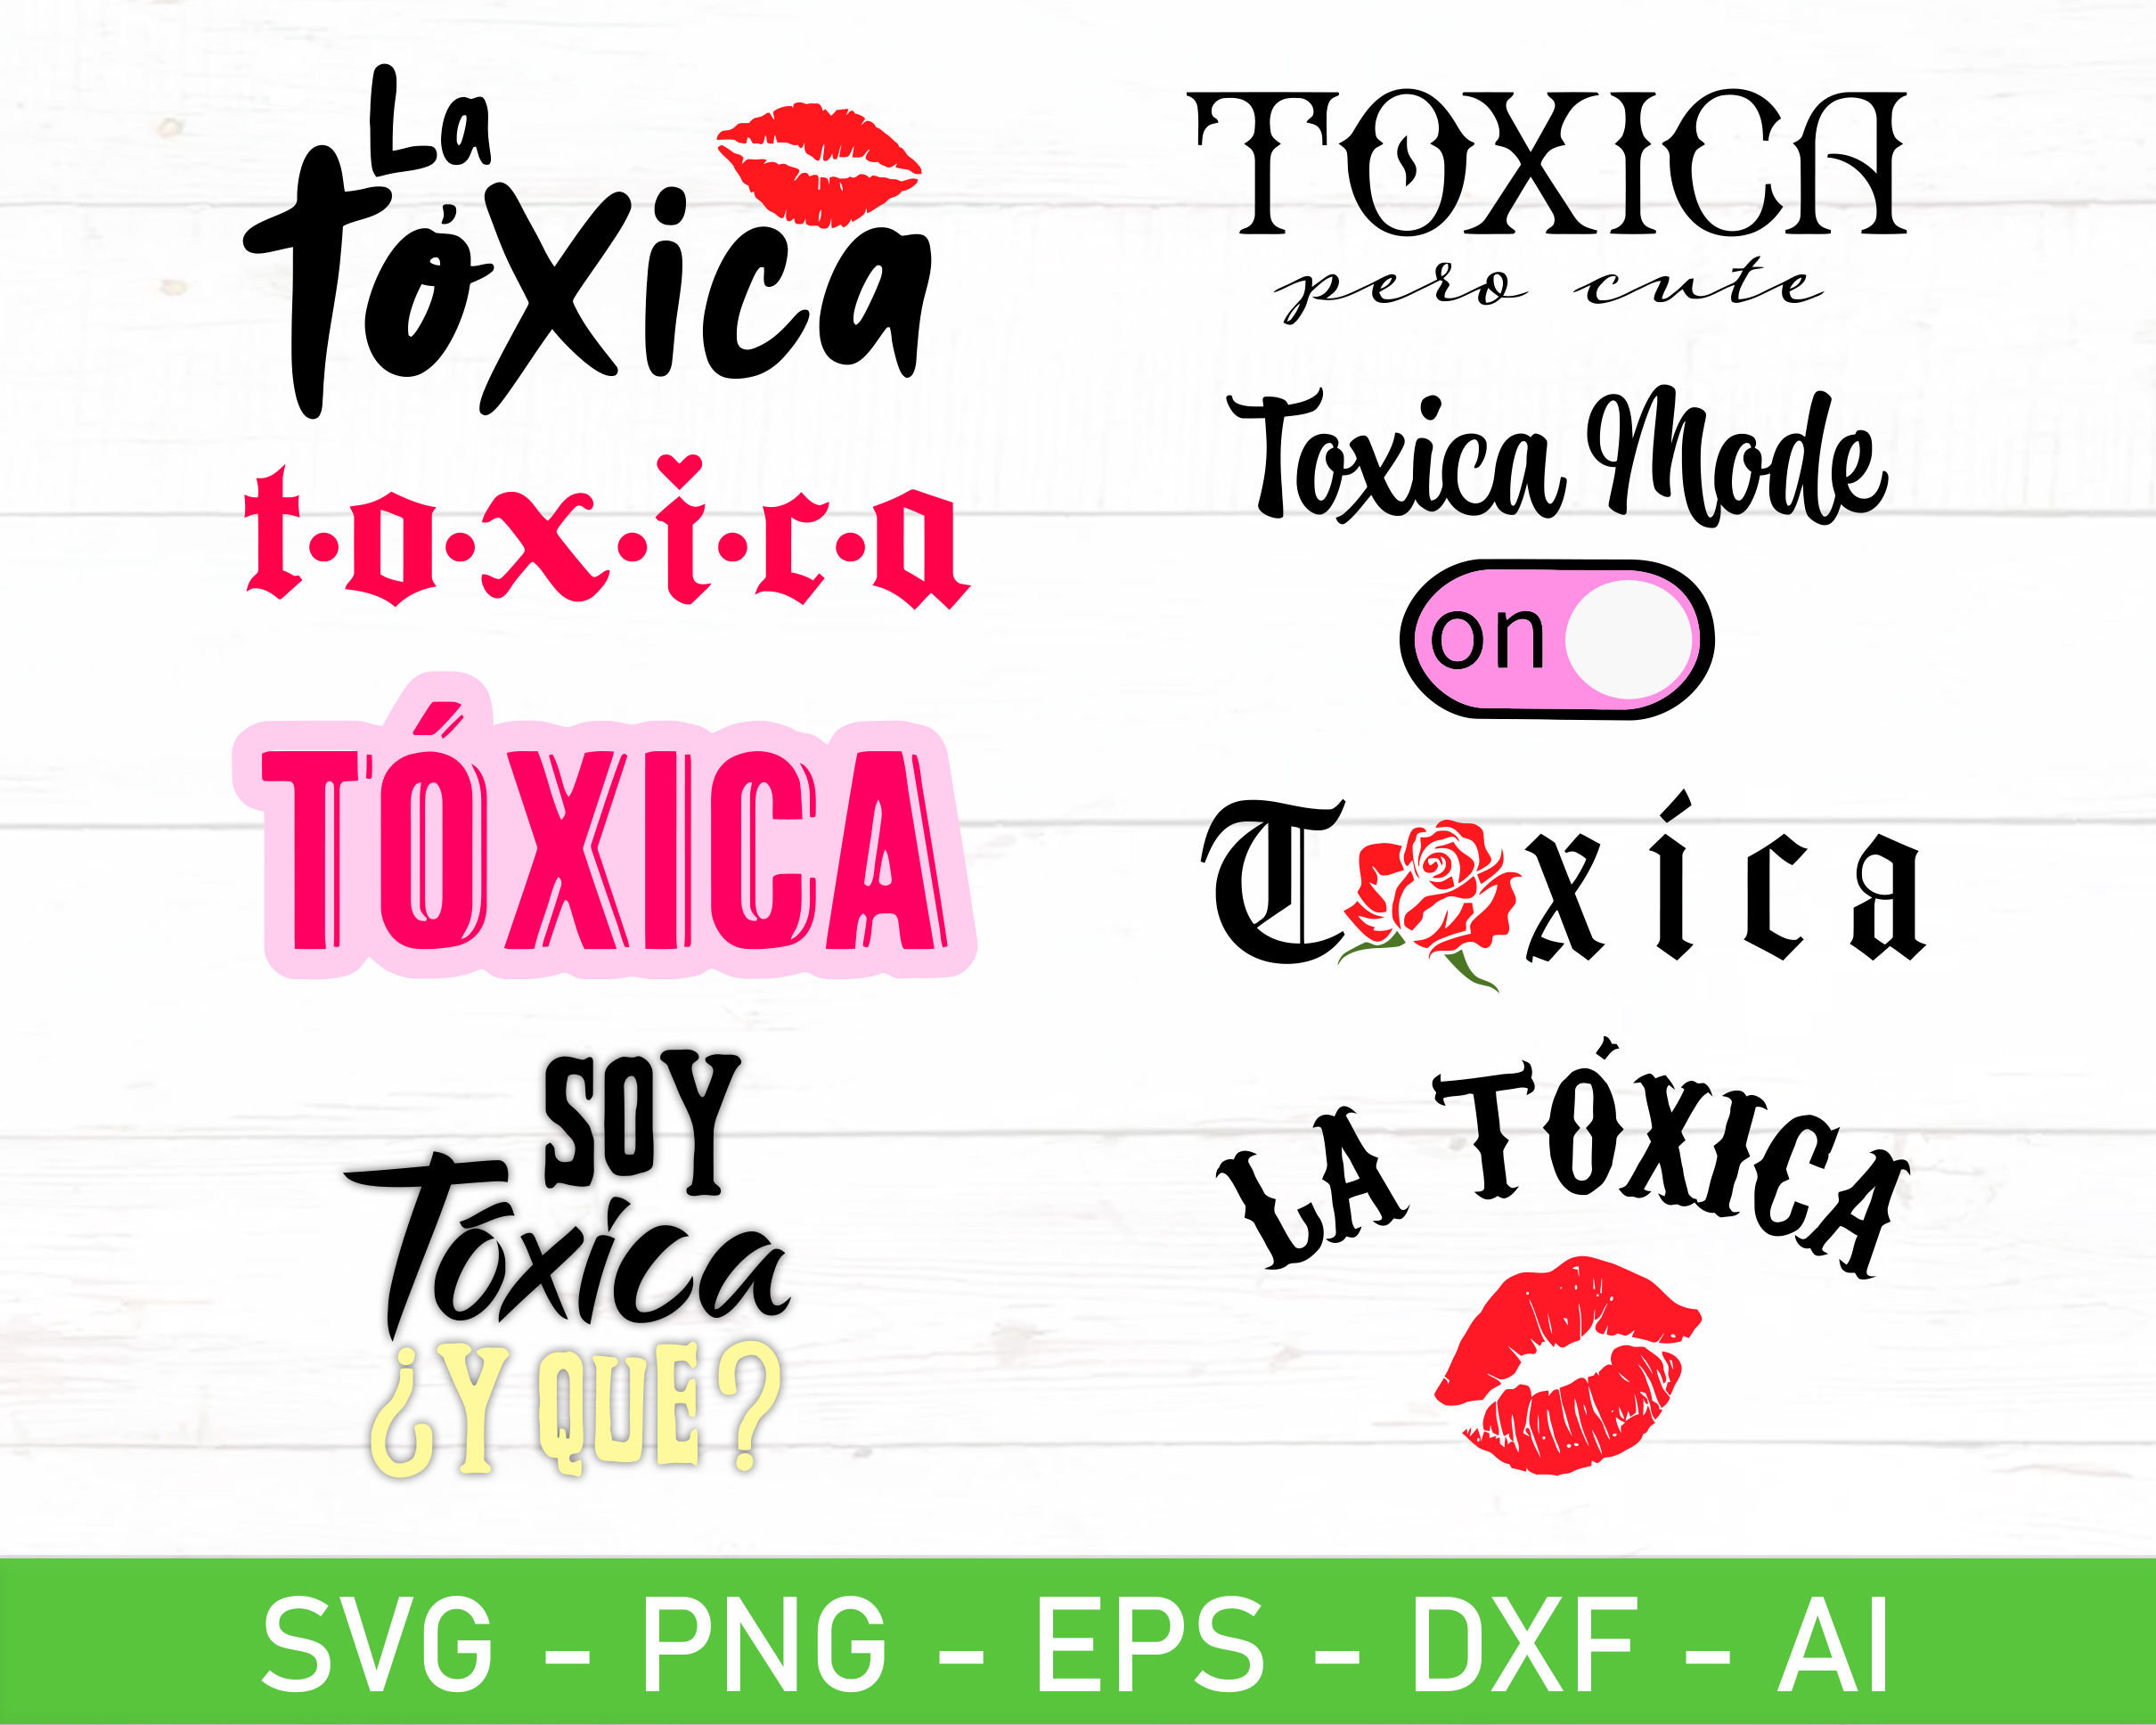 Paquete Toxica SVG, Soy Toxica svg, La Toxica svg, eps, dxf, ai, png ...